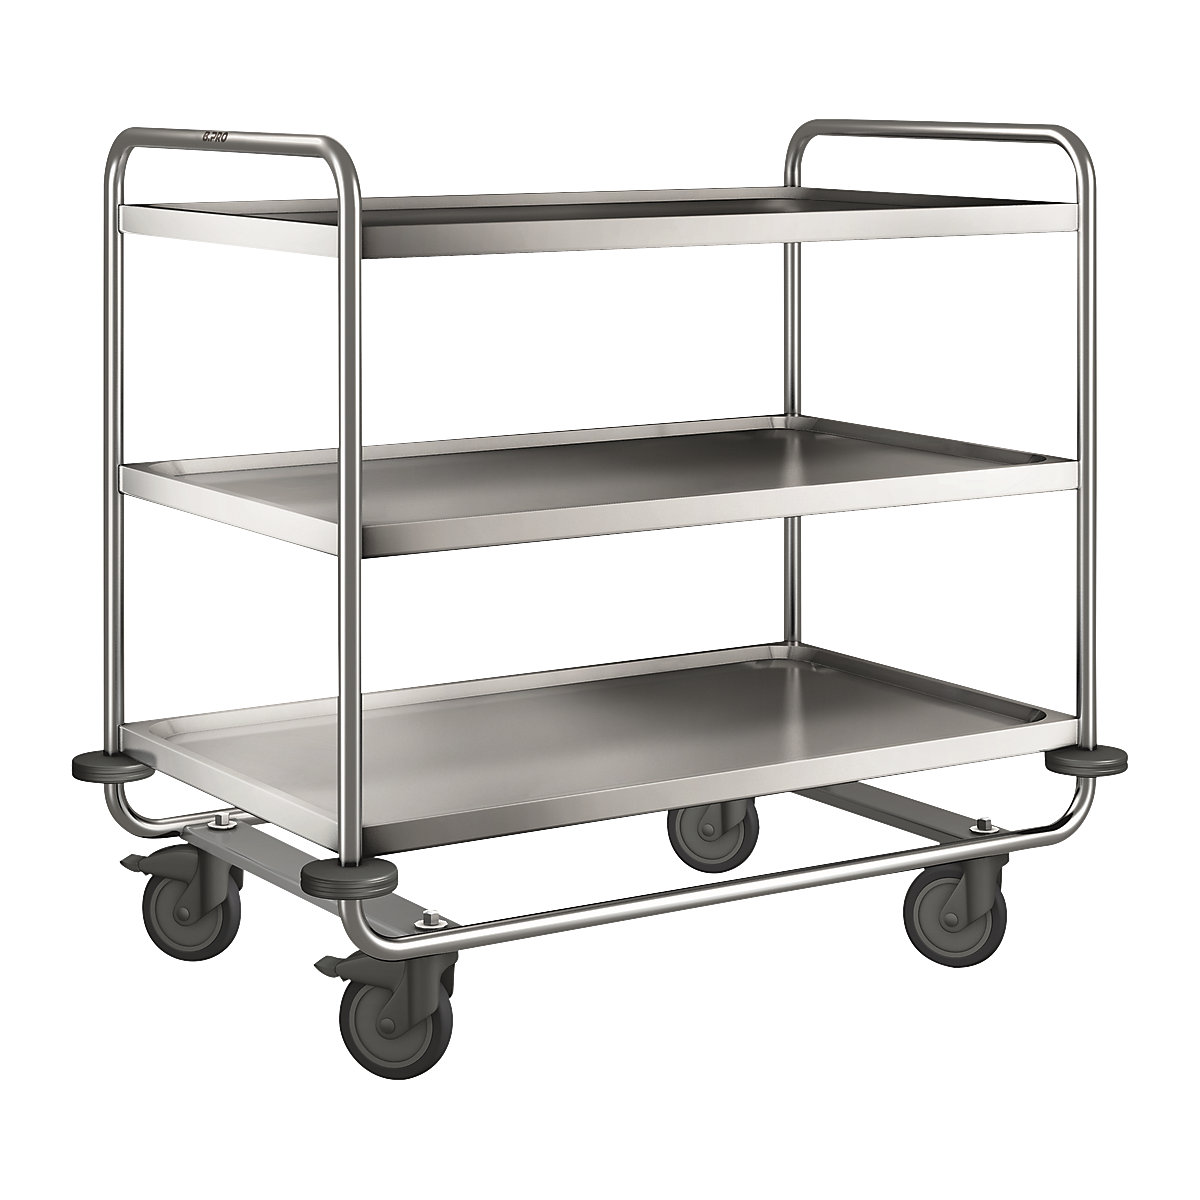 BLANCO stainless steel serving trolley – B.PRO, with 3 shelves, LxWxH 1100 x 700 x 1010 mm-2